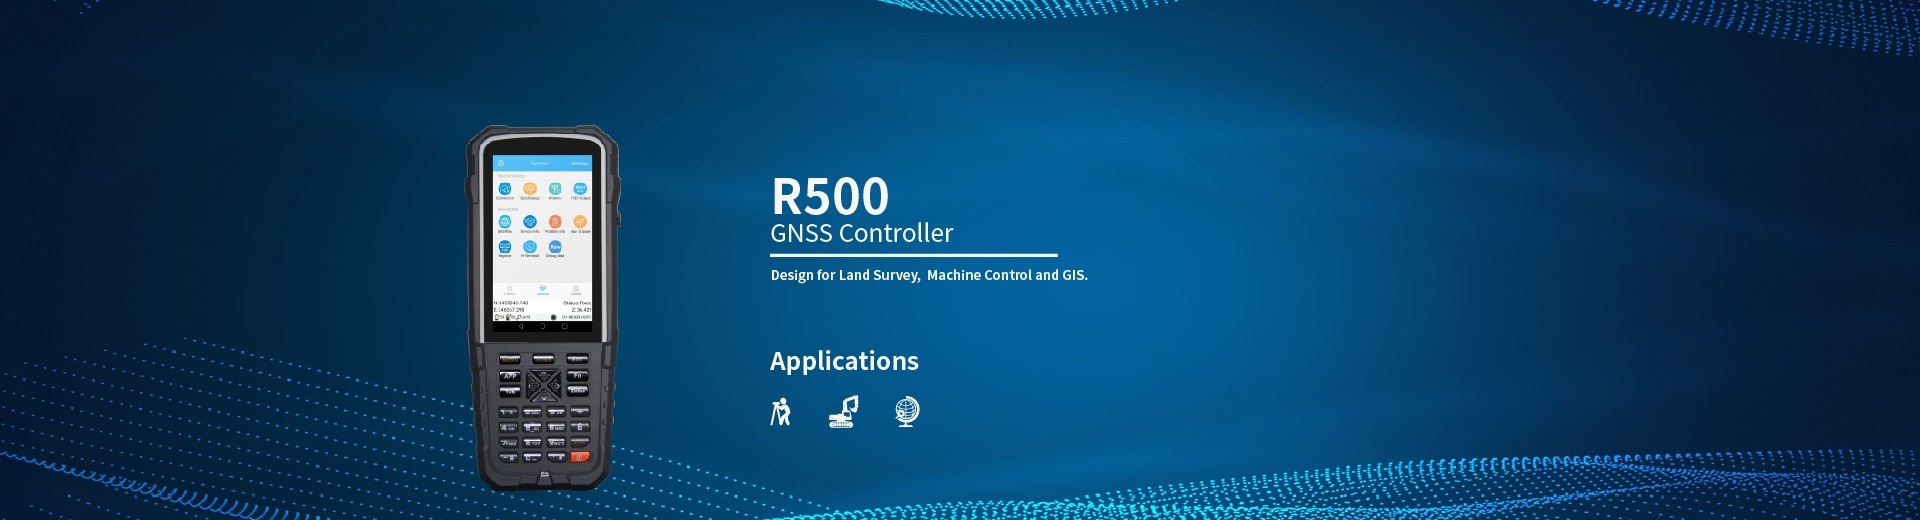 R500 Data Collector